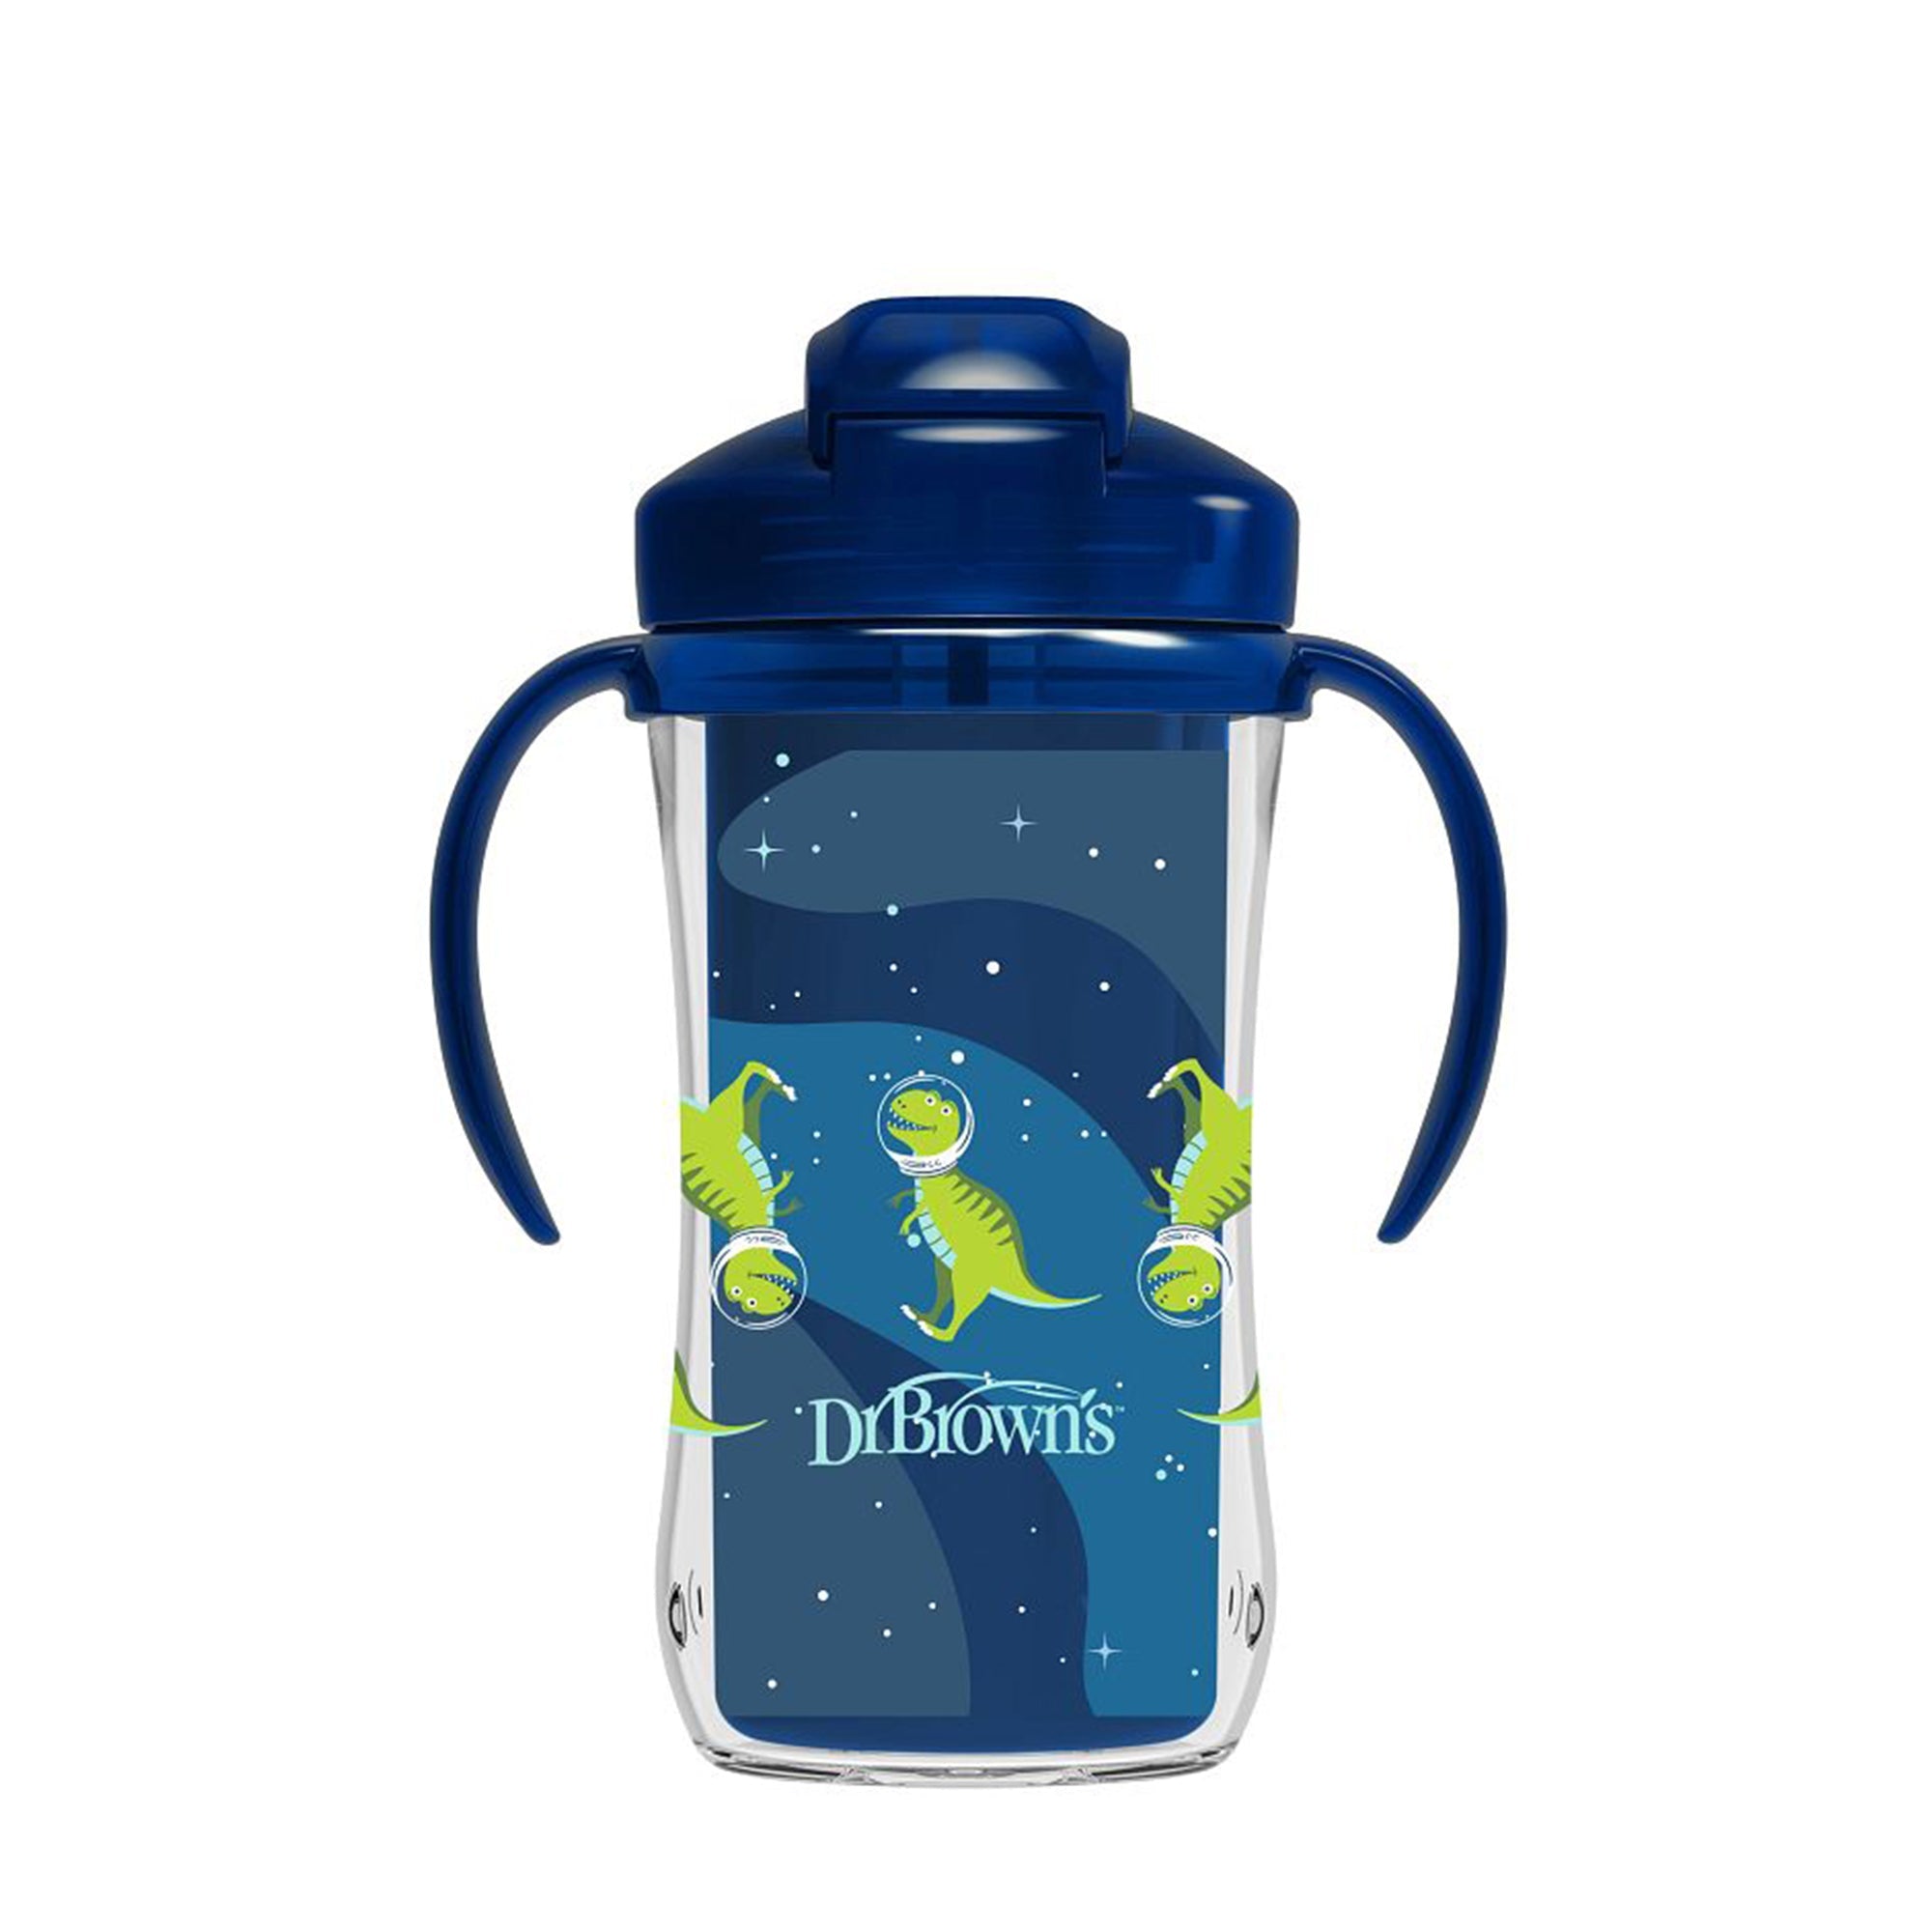 Dr. Brown Insulated Straw Cup || Pack of 1 | Color-Blue || Used for 12months to 36months - Toys4All.in